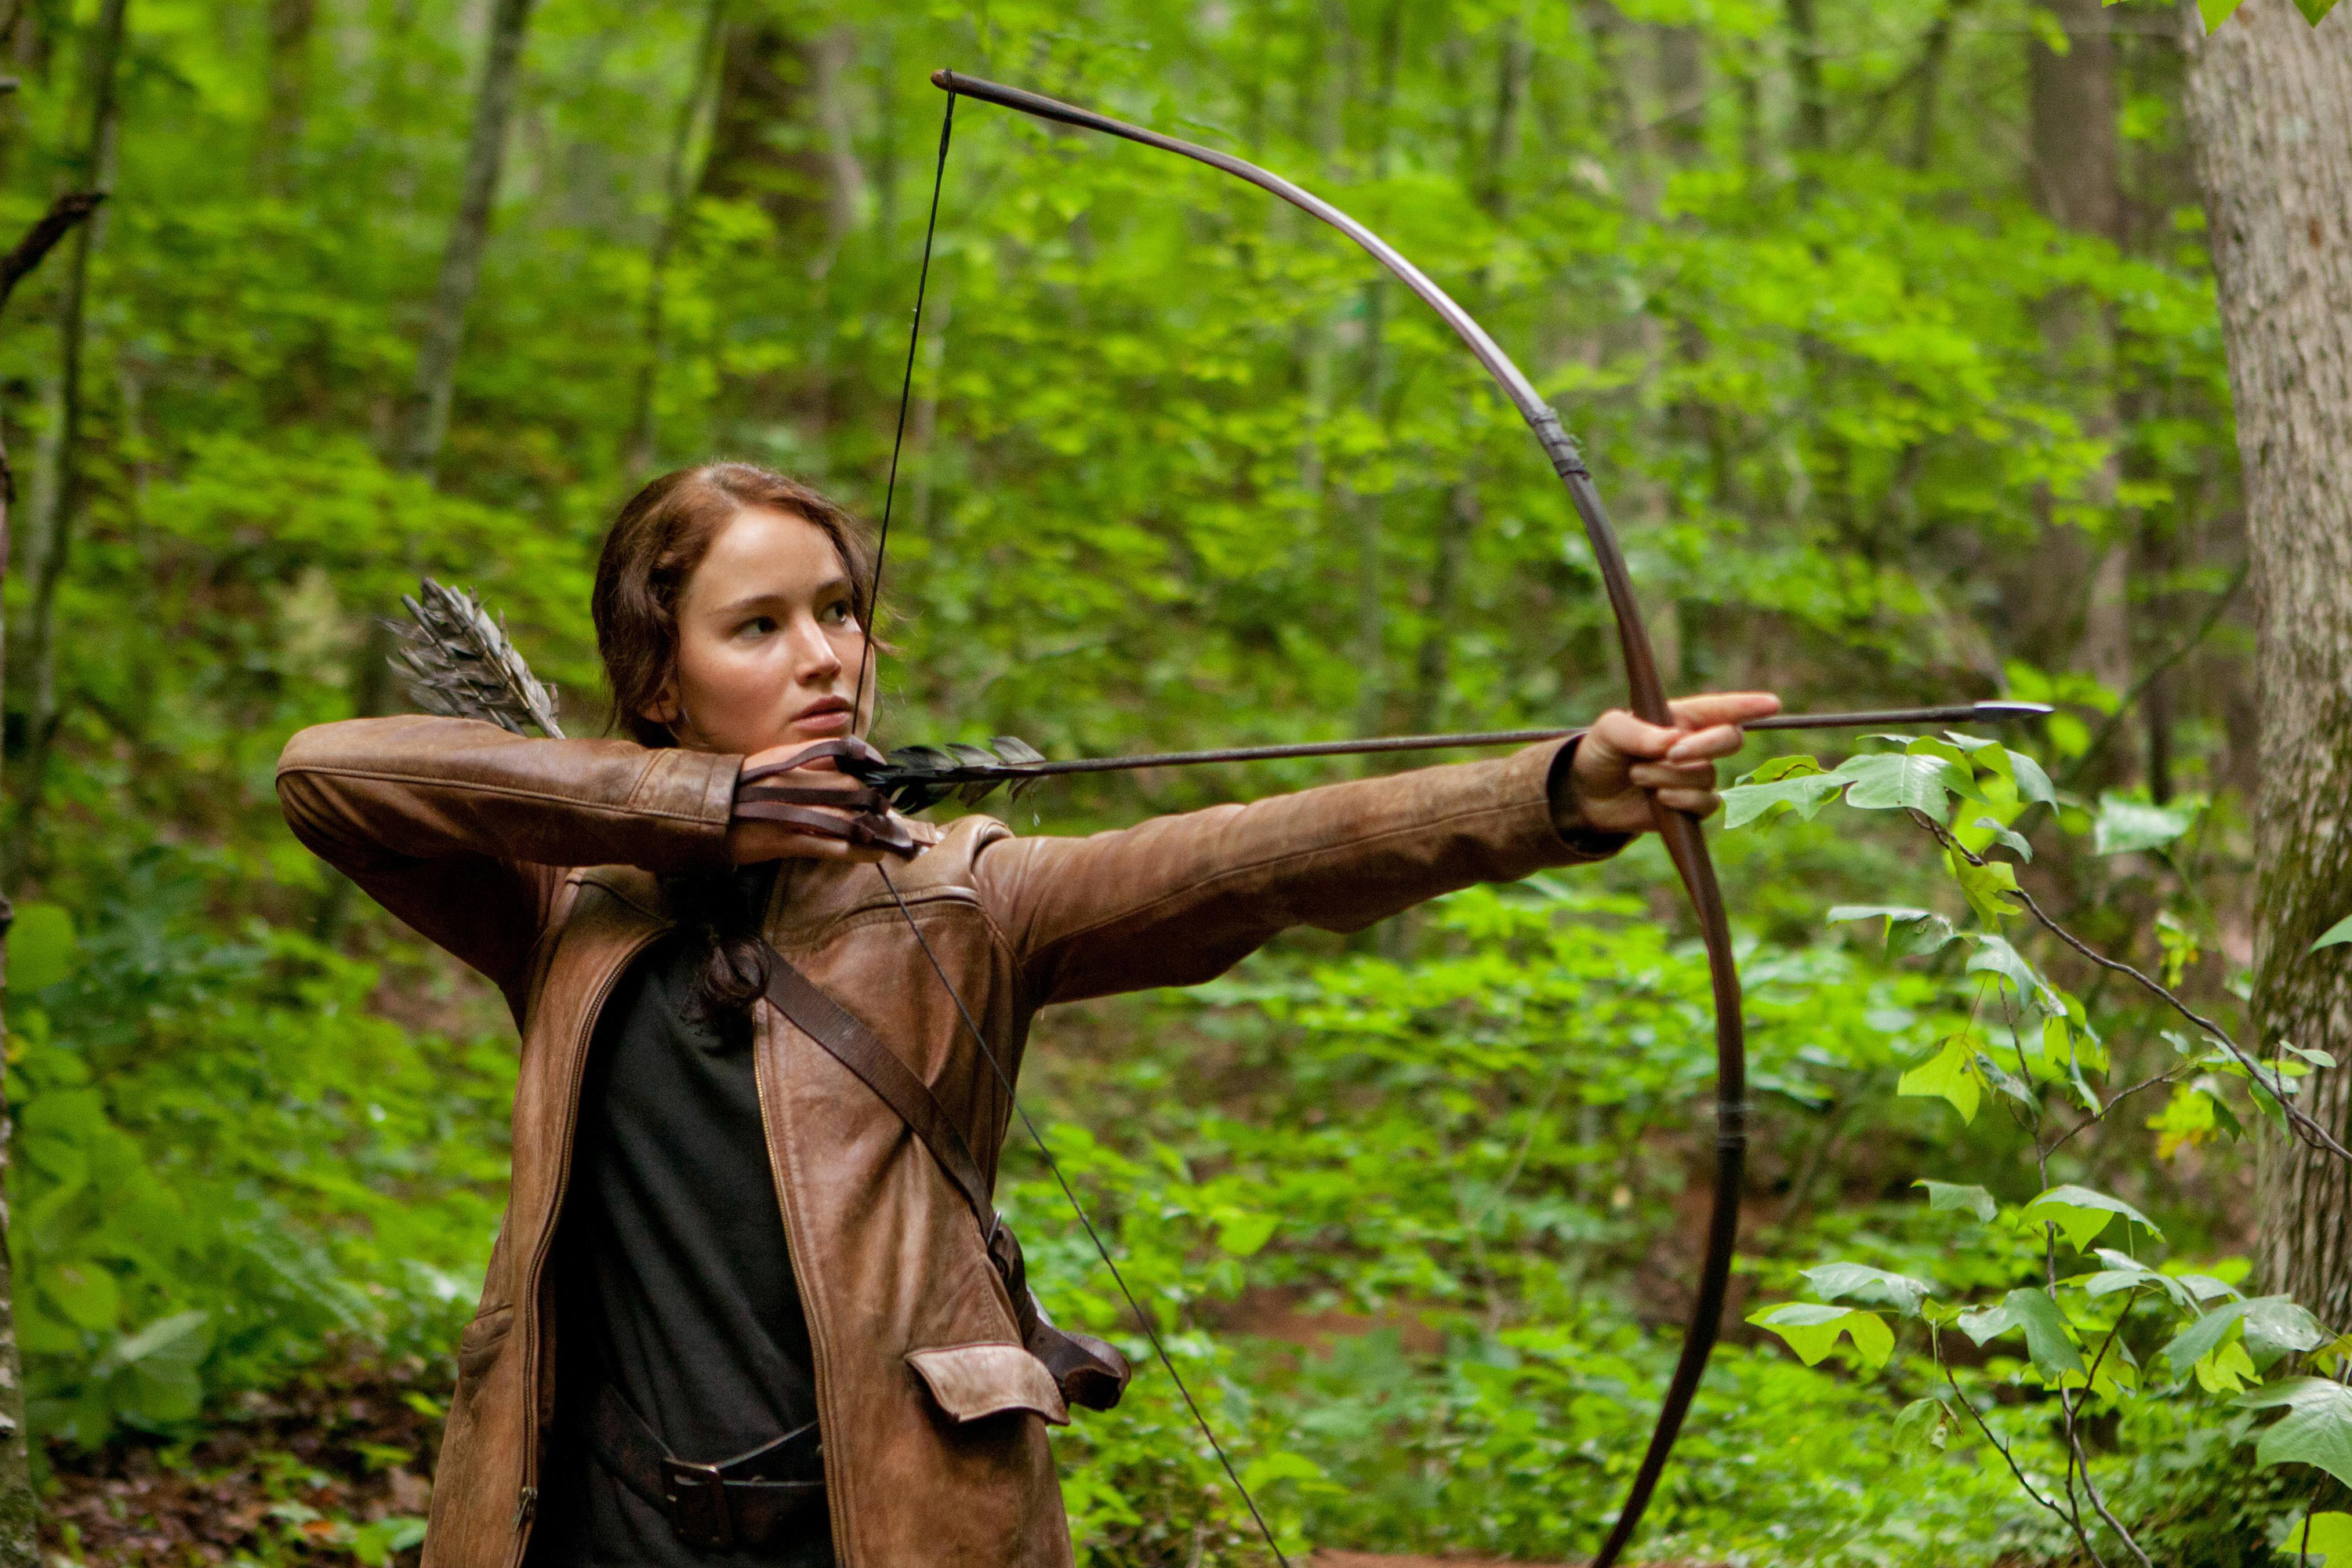 Katniss aiming an arrow in her leather jacket